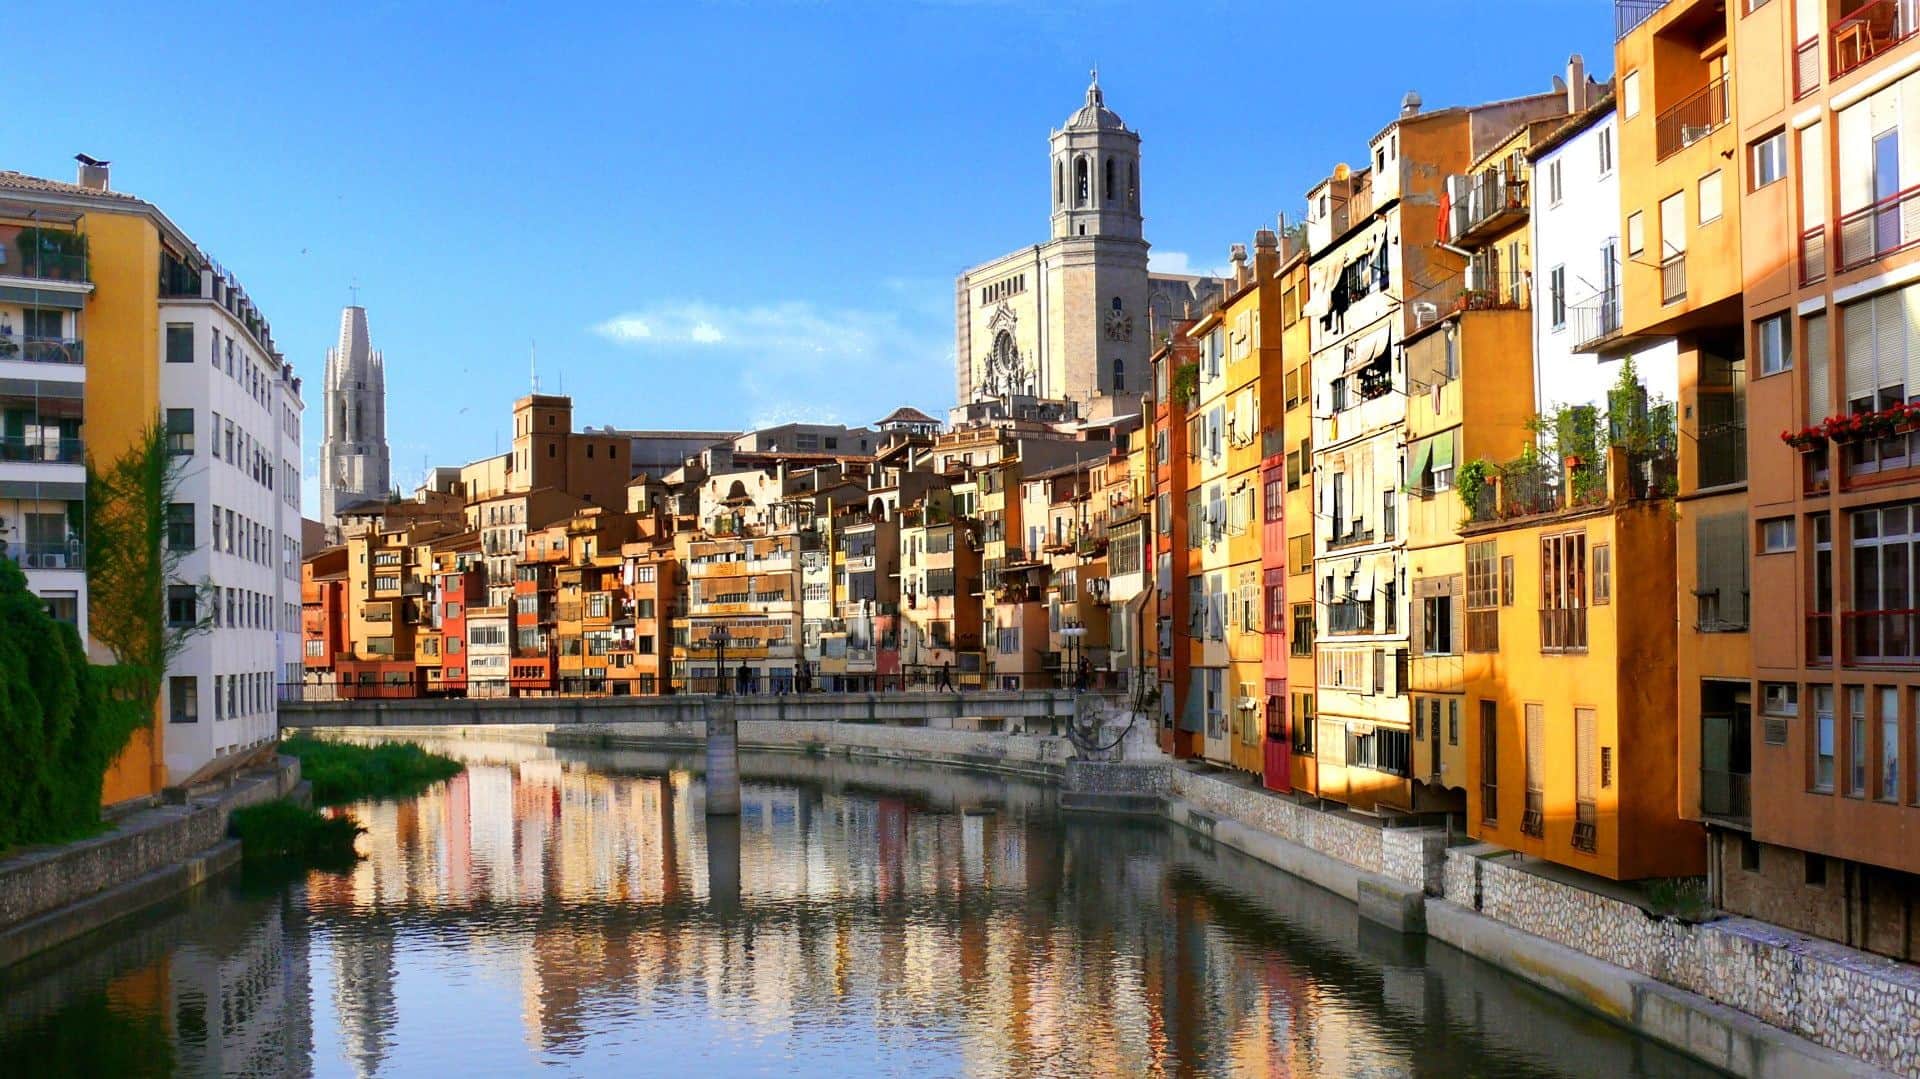 Medieval Girona and Game of Thrones private live virtual tour - In out Barcelona Tours